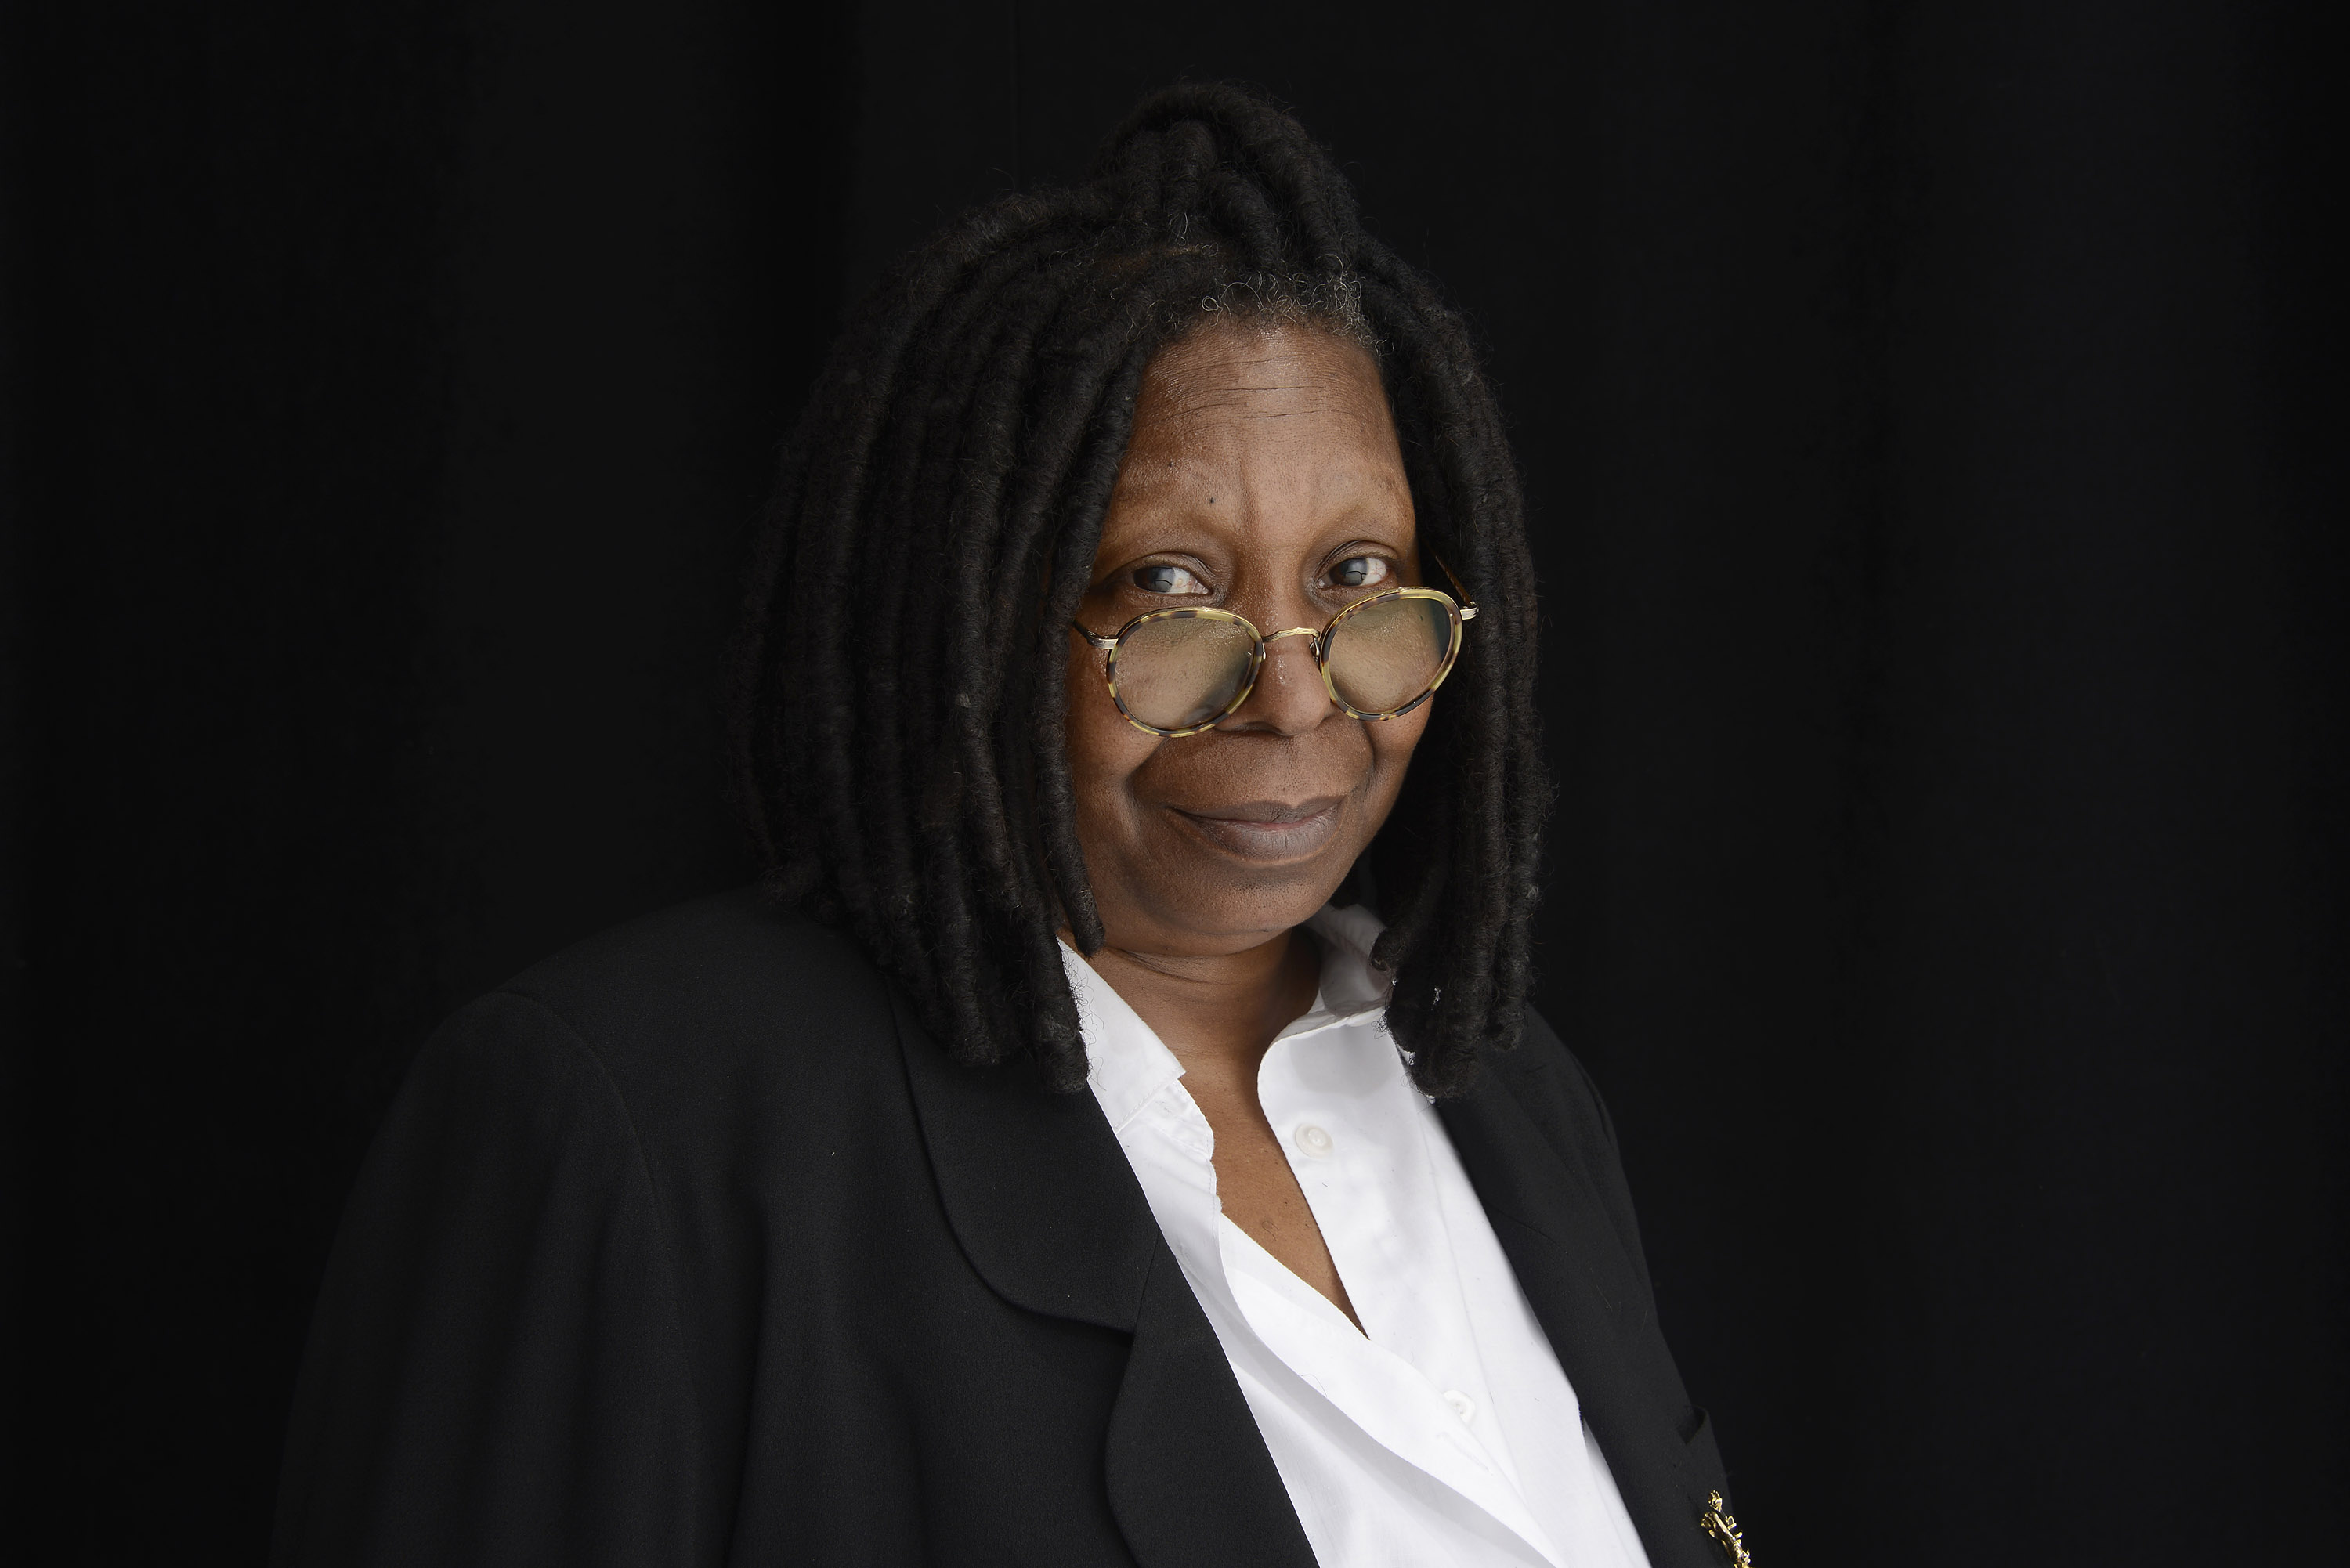 Whoopi Goldberg at the Tribeca Film Festival 2013 portrait studio on April 17, 2013 in New York City. (Larry Busacca—Getty Images)